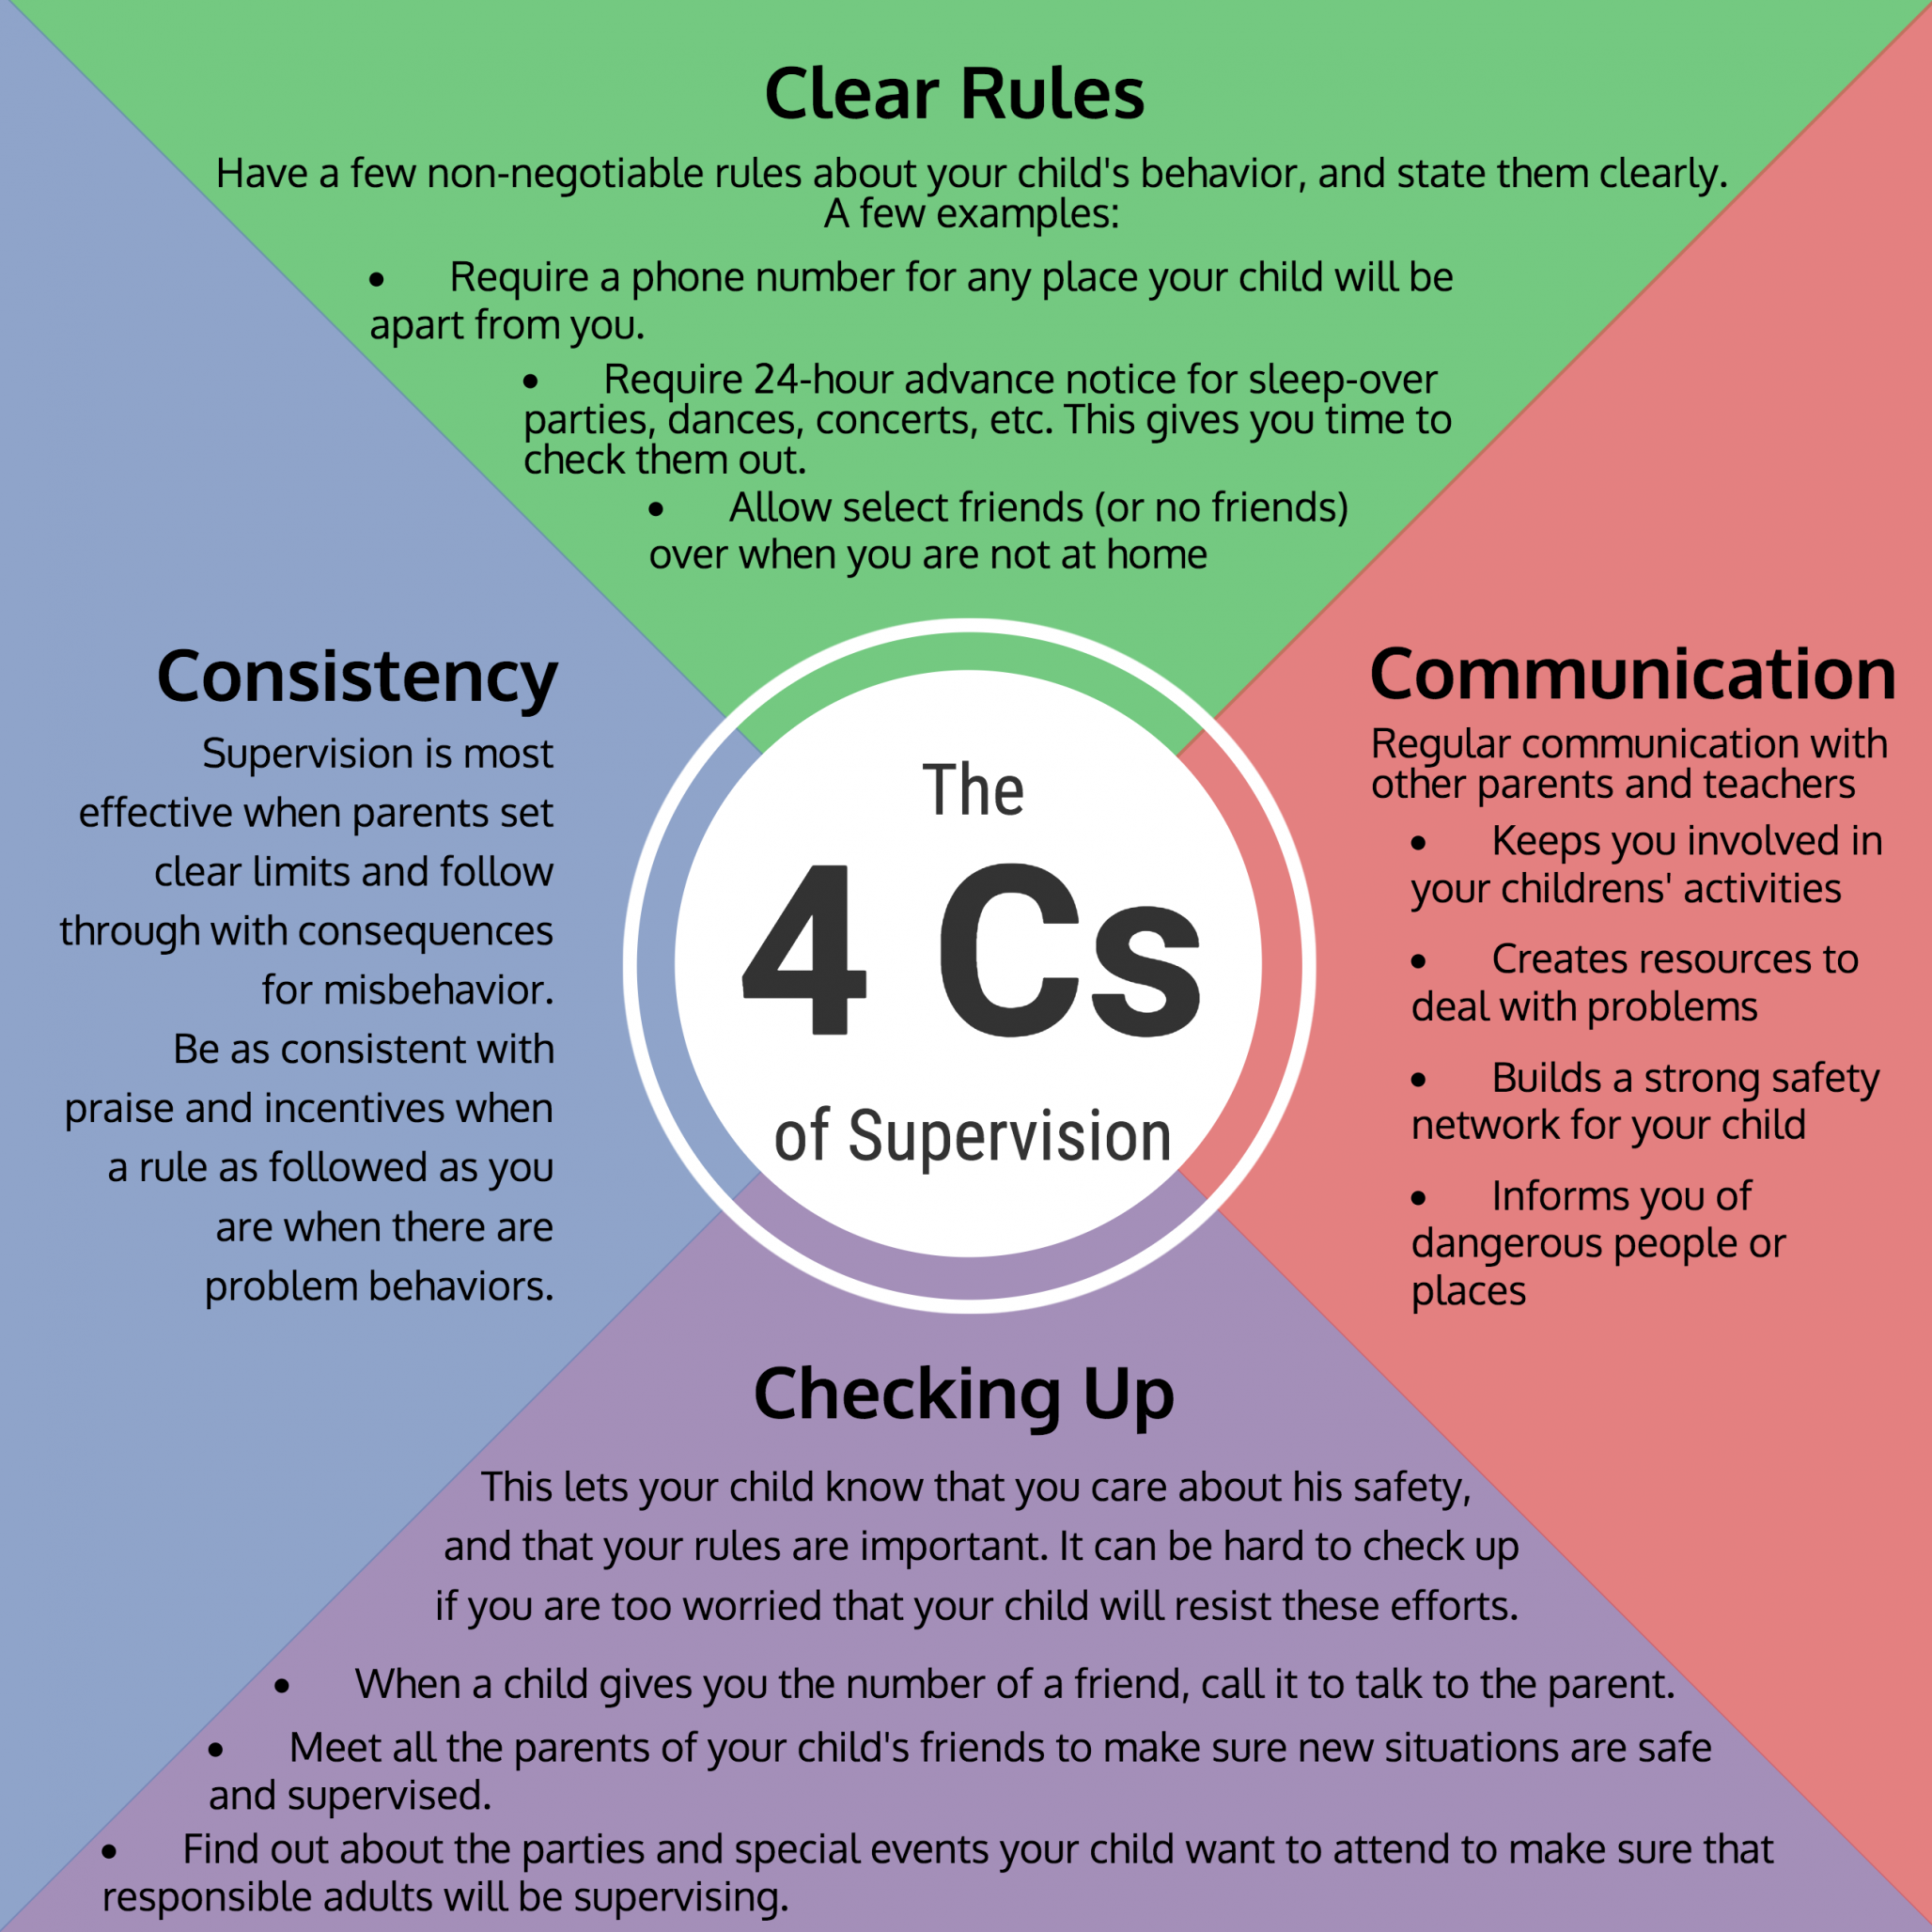 The 4Cs of supervision: Clear Rules, Communication, Checking Up, and Consistency